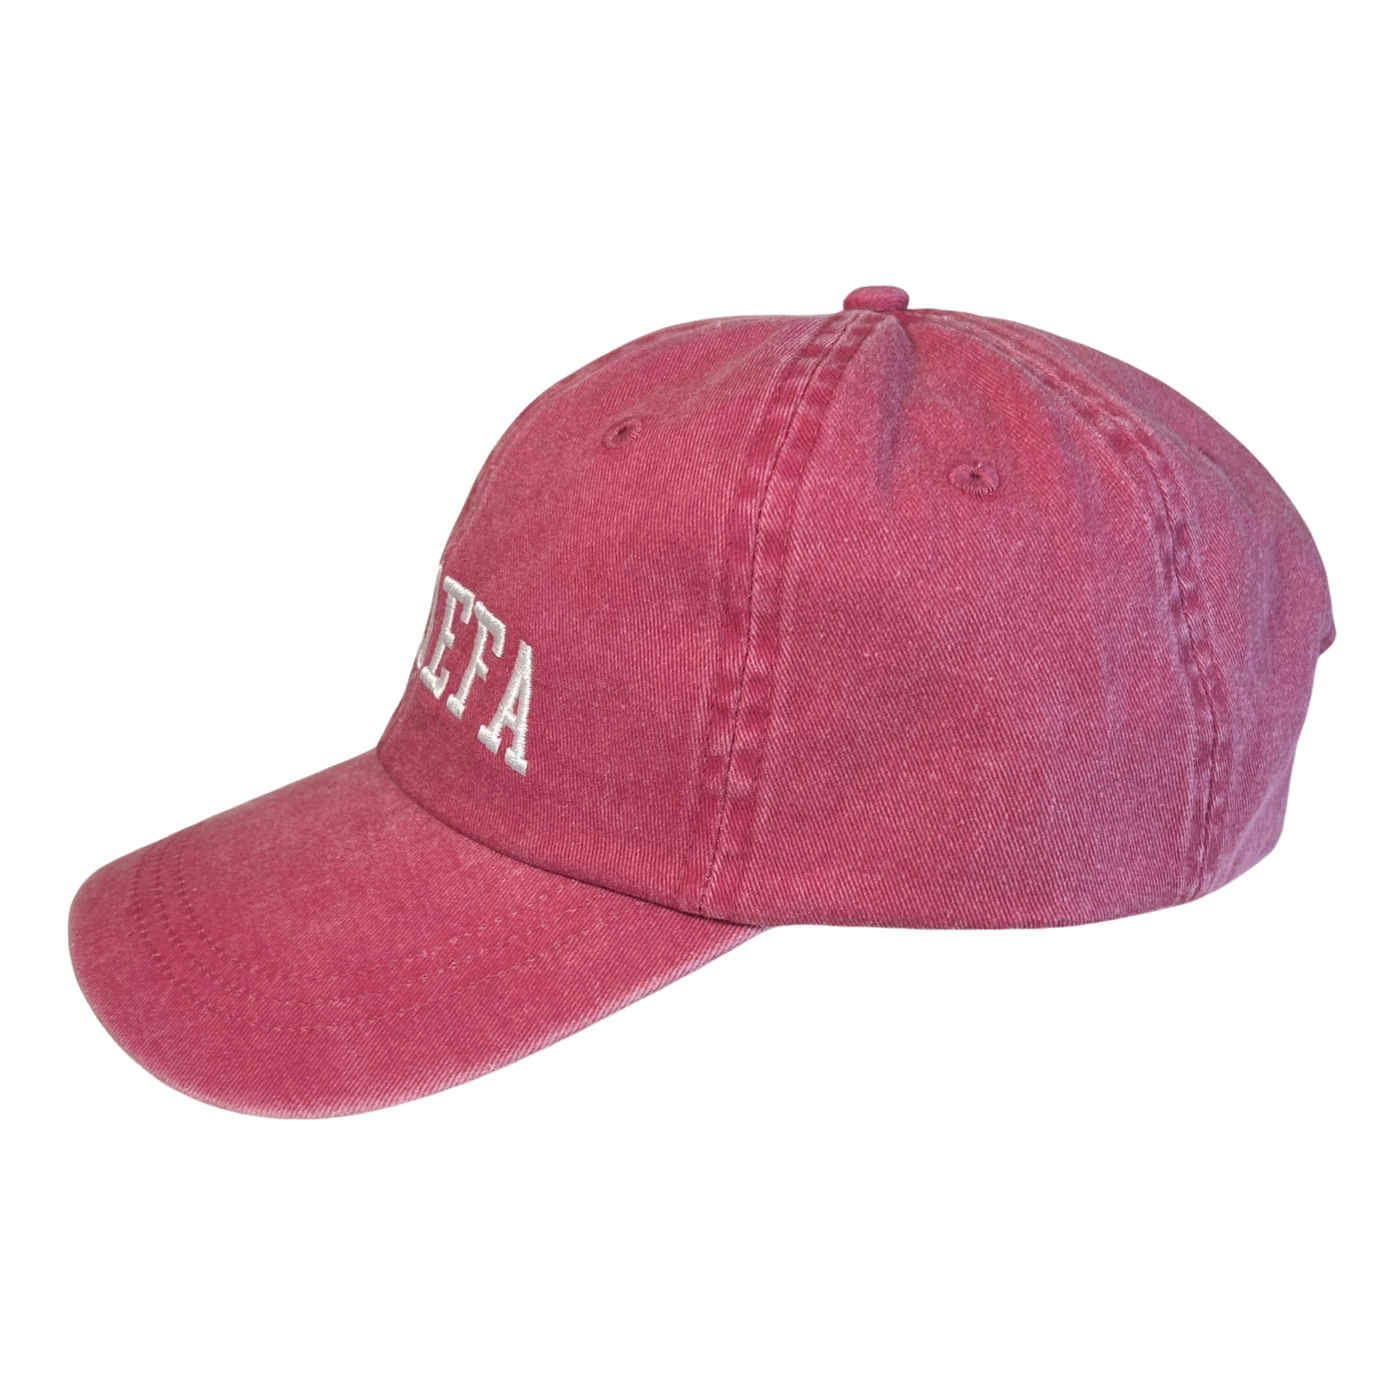 side view of a pink hat with the phrase La Jefa in white lettering